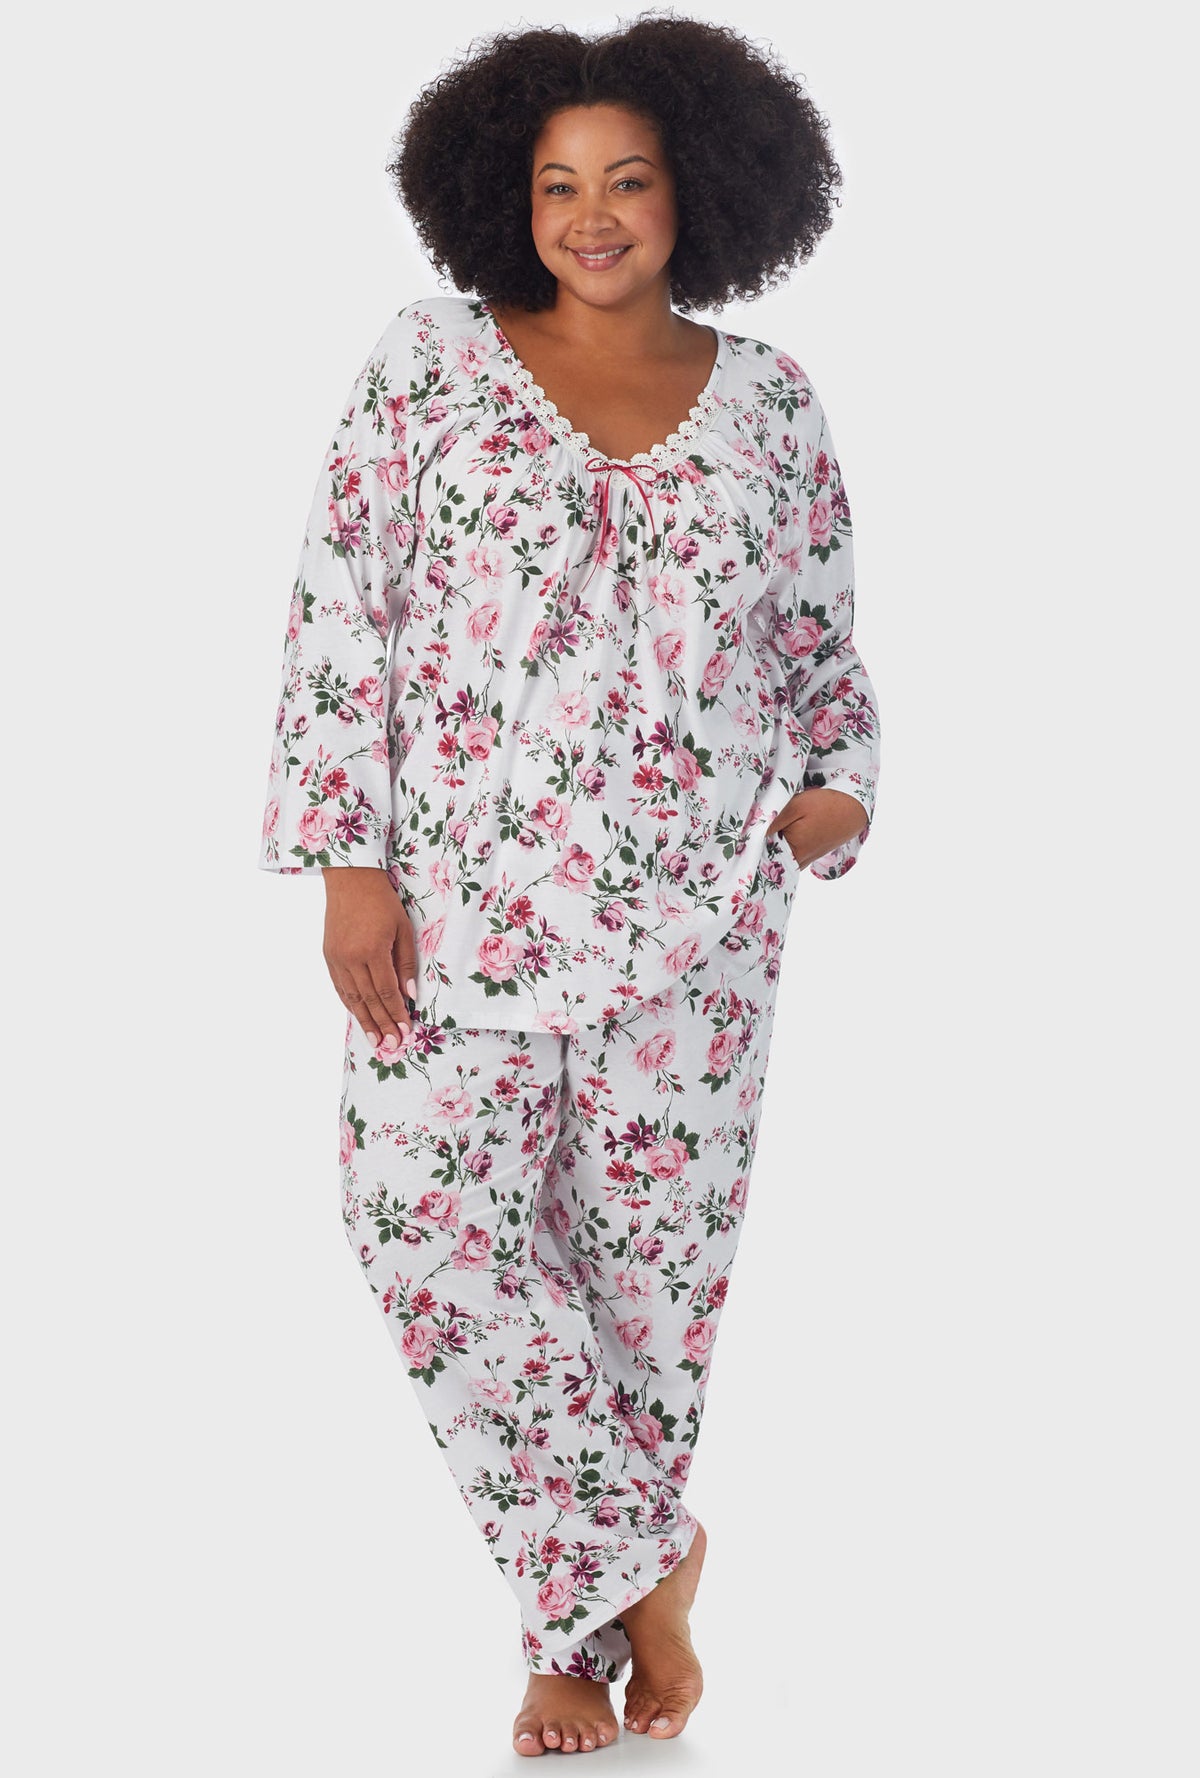 A lady wearing 3/4 Sleeve Long Pant plus size PJ Set with Pink and Berry Roses print